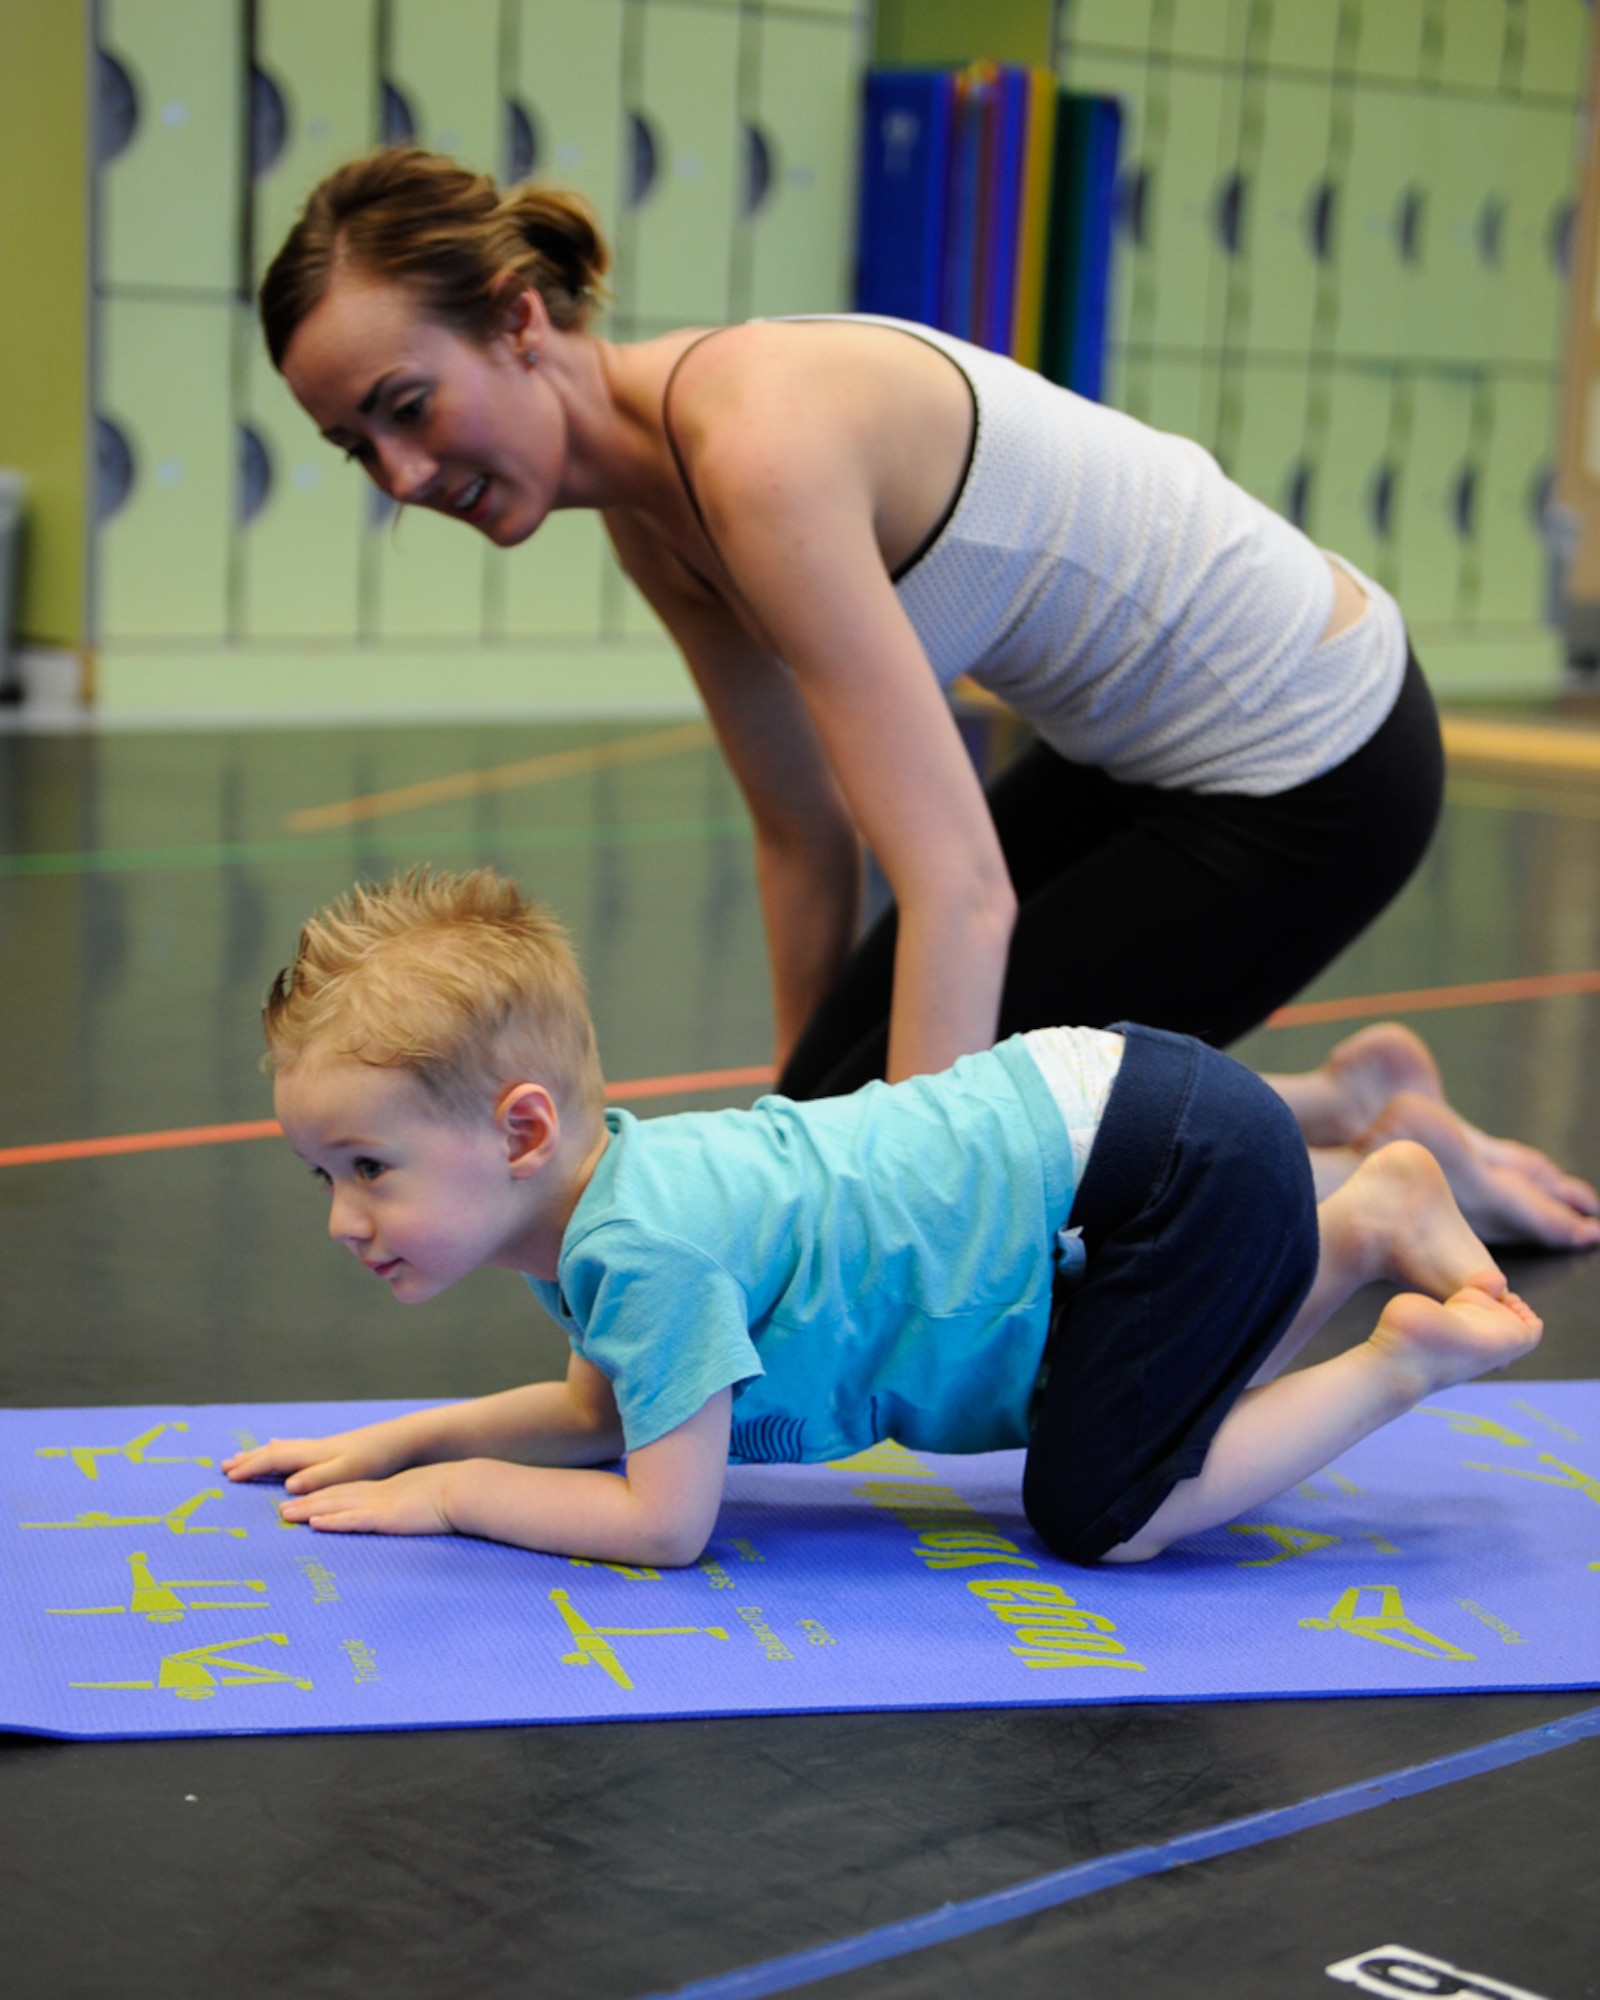 Jackson Parnell and mother Brandy Parnell move into the next yoga pose during a Mommy and Me Yoga course Aug. 29, 2016, at Ramstein Air Base, Germany. The instructor incorporated nontraditional names for poses to keep the young children more engaged, as well as created an environment to promote a deeper mother and child bond. (U.S. Air Force photo/ Airman 1st Class Savannah L. Waters)